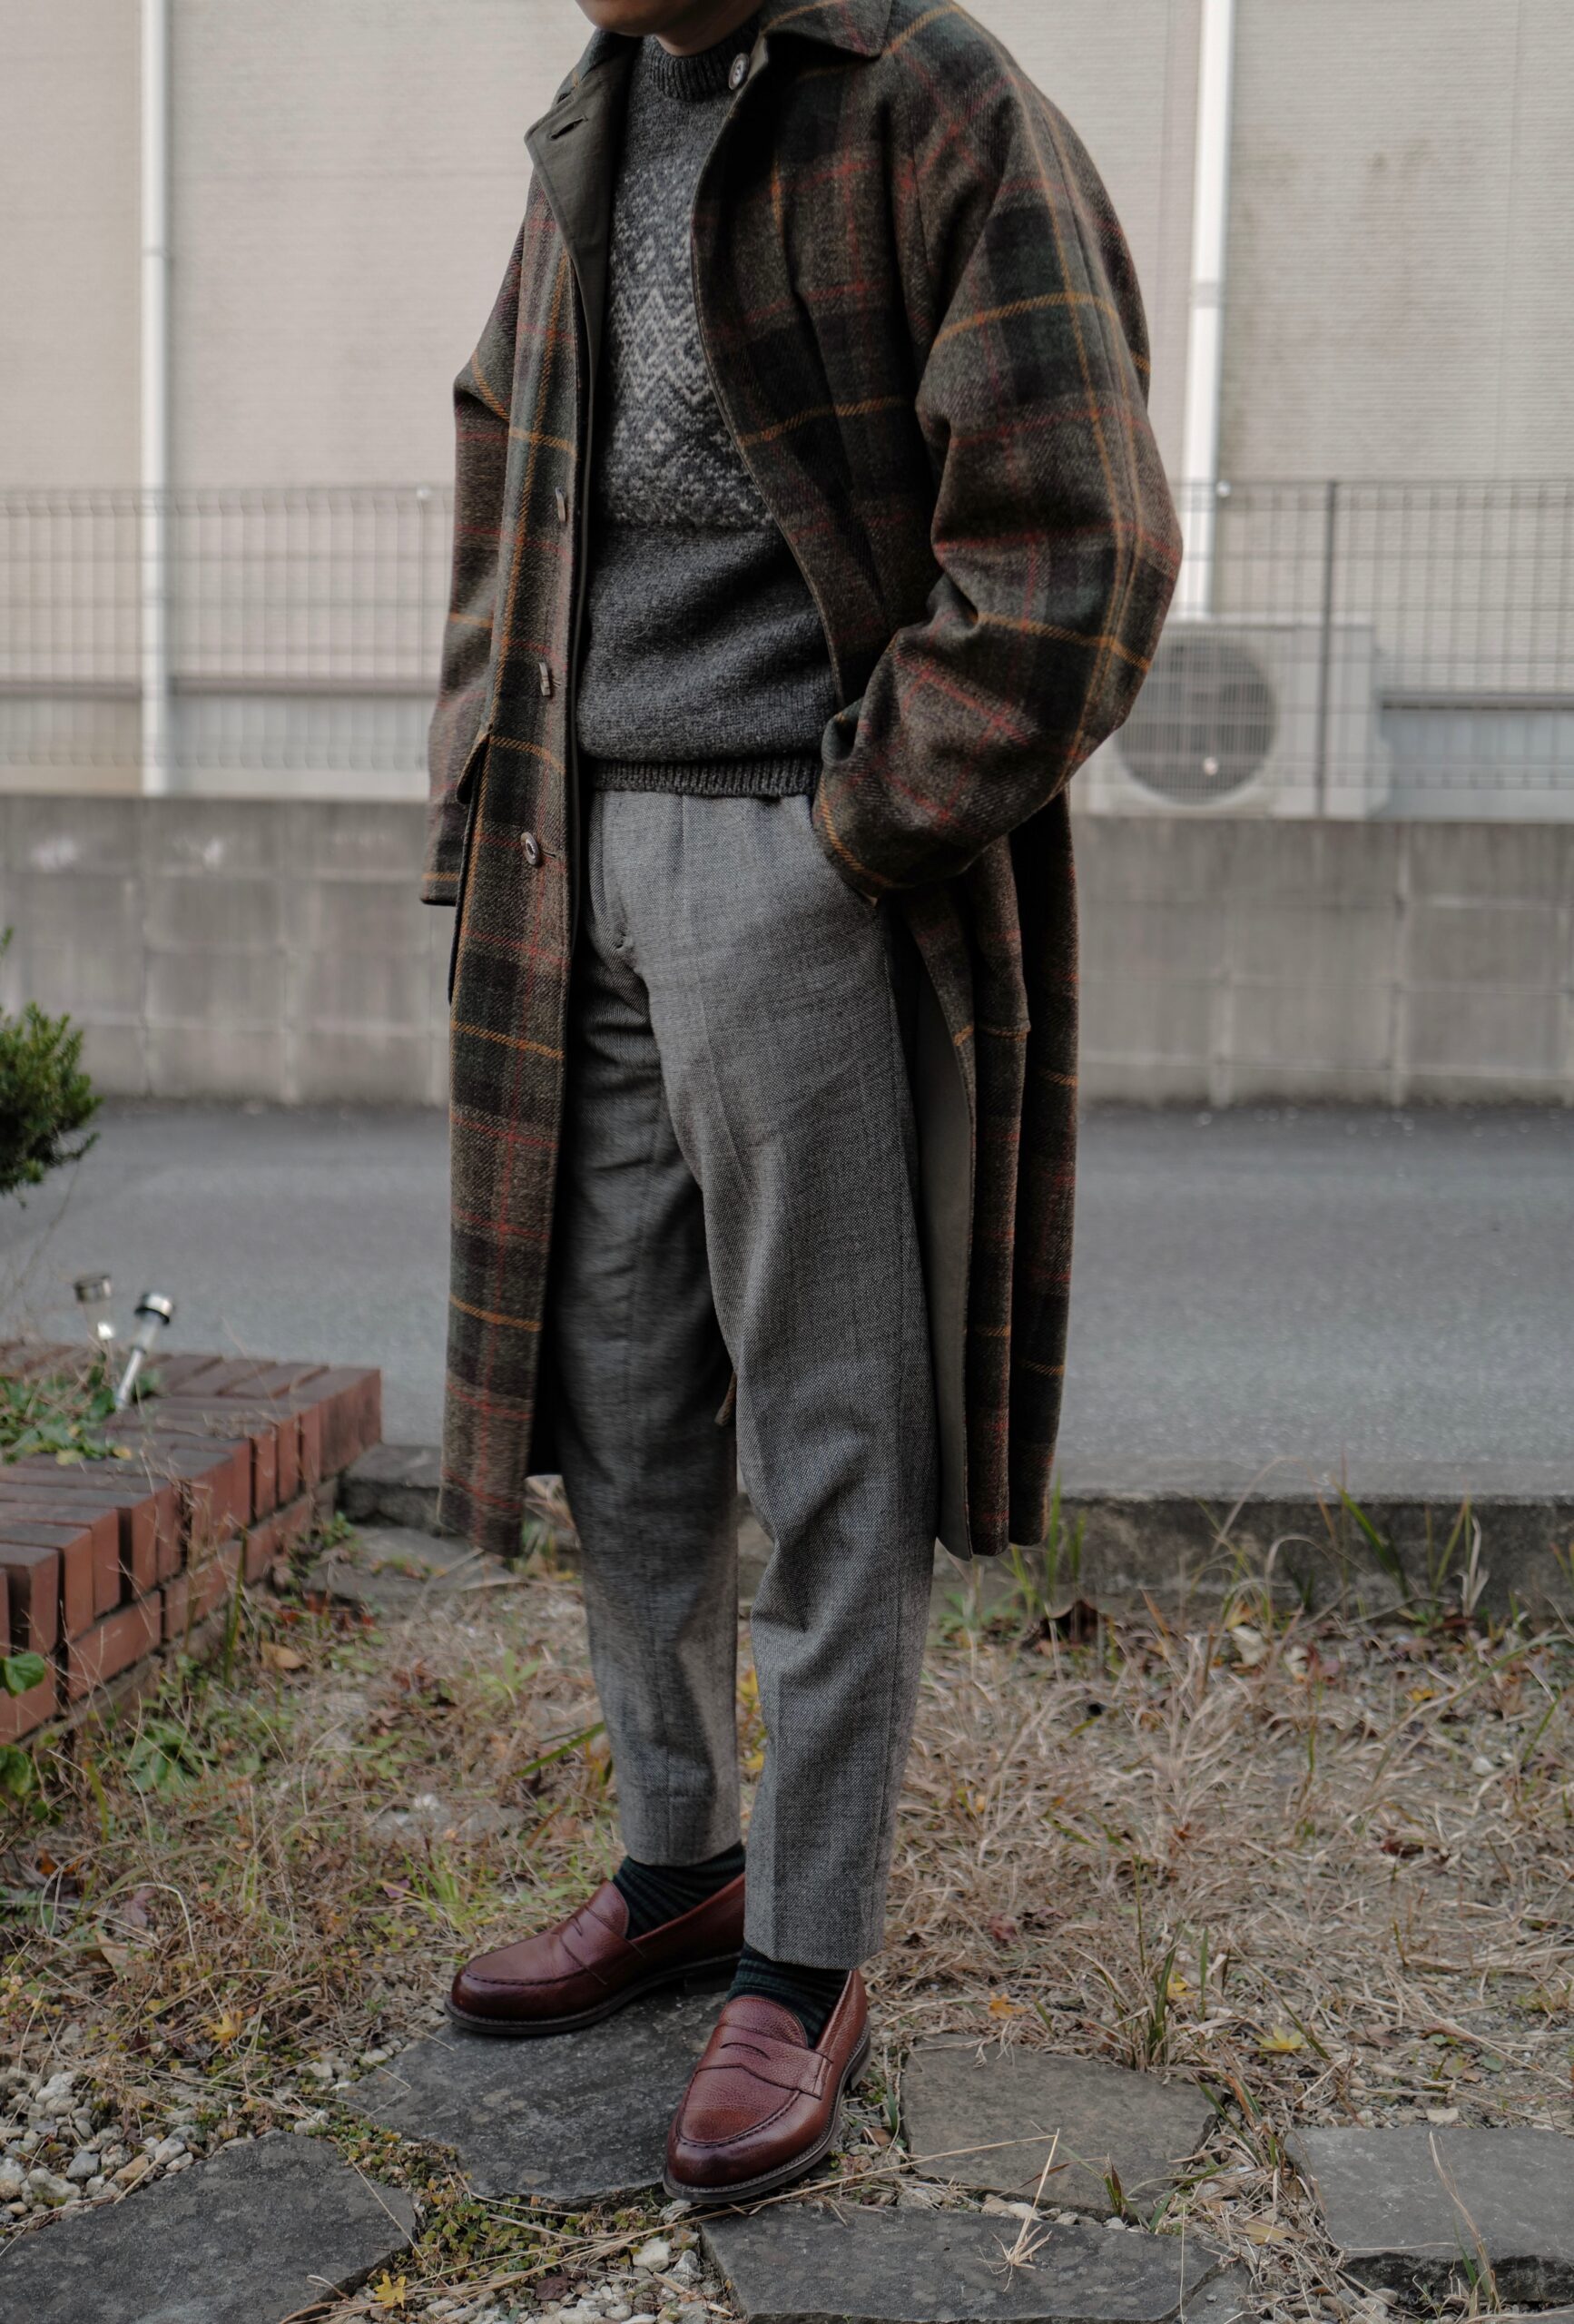 JOHN SMEDLEY ｜ CachetteMENSカテゴリー ｜ Clothes to You